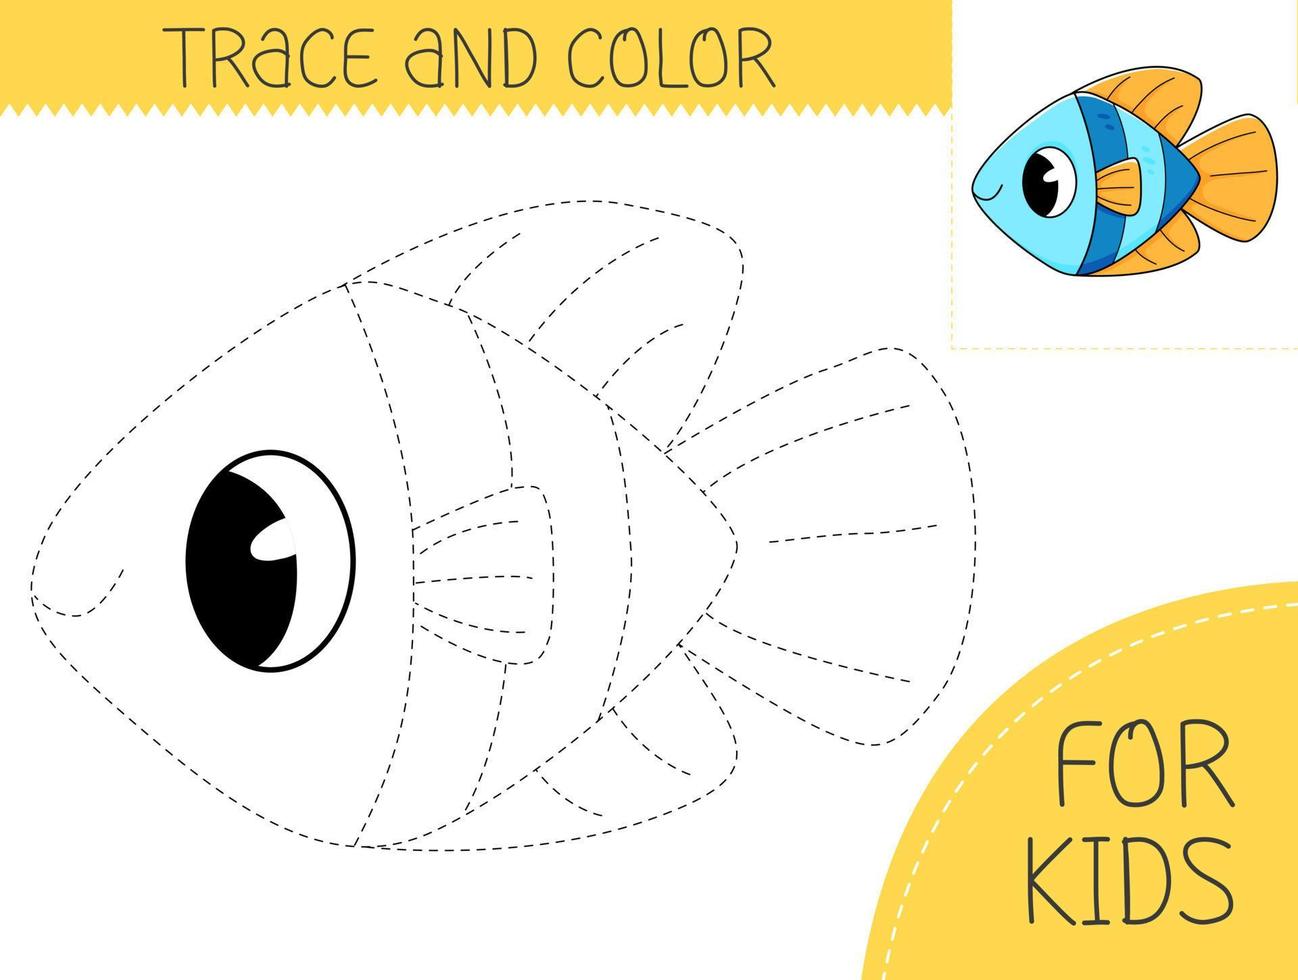 Trace and color coloring book with cute fish for kids. Coloring page with cartoon fish. illustration for kids vector